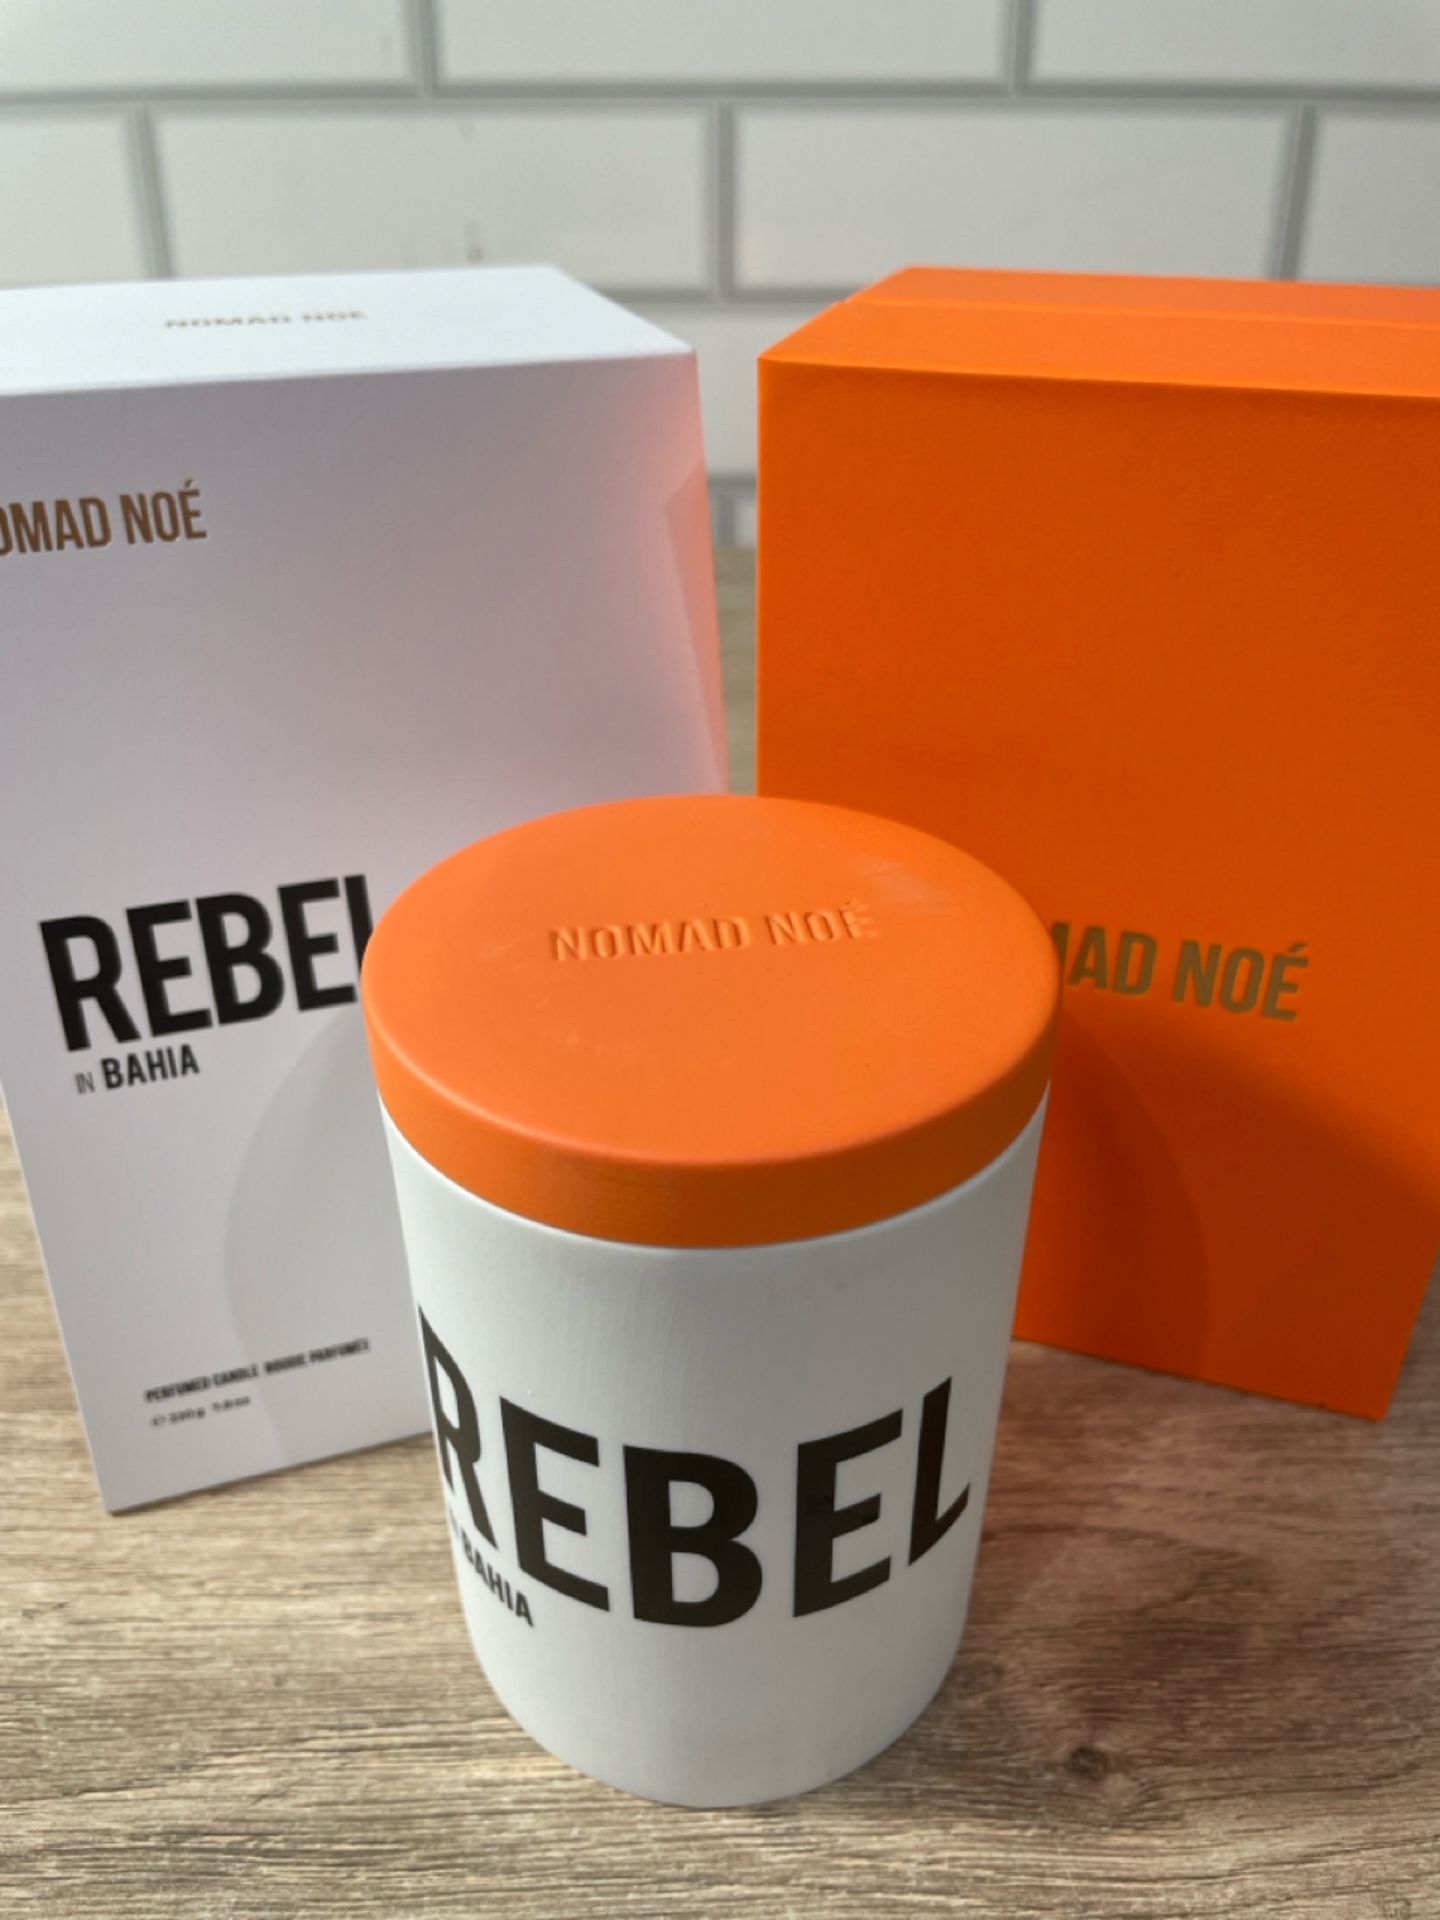 Rebel Scented Candle from Nomad Noe - Image 4 of 4